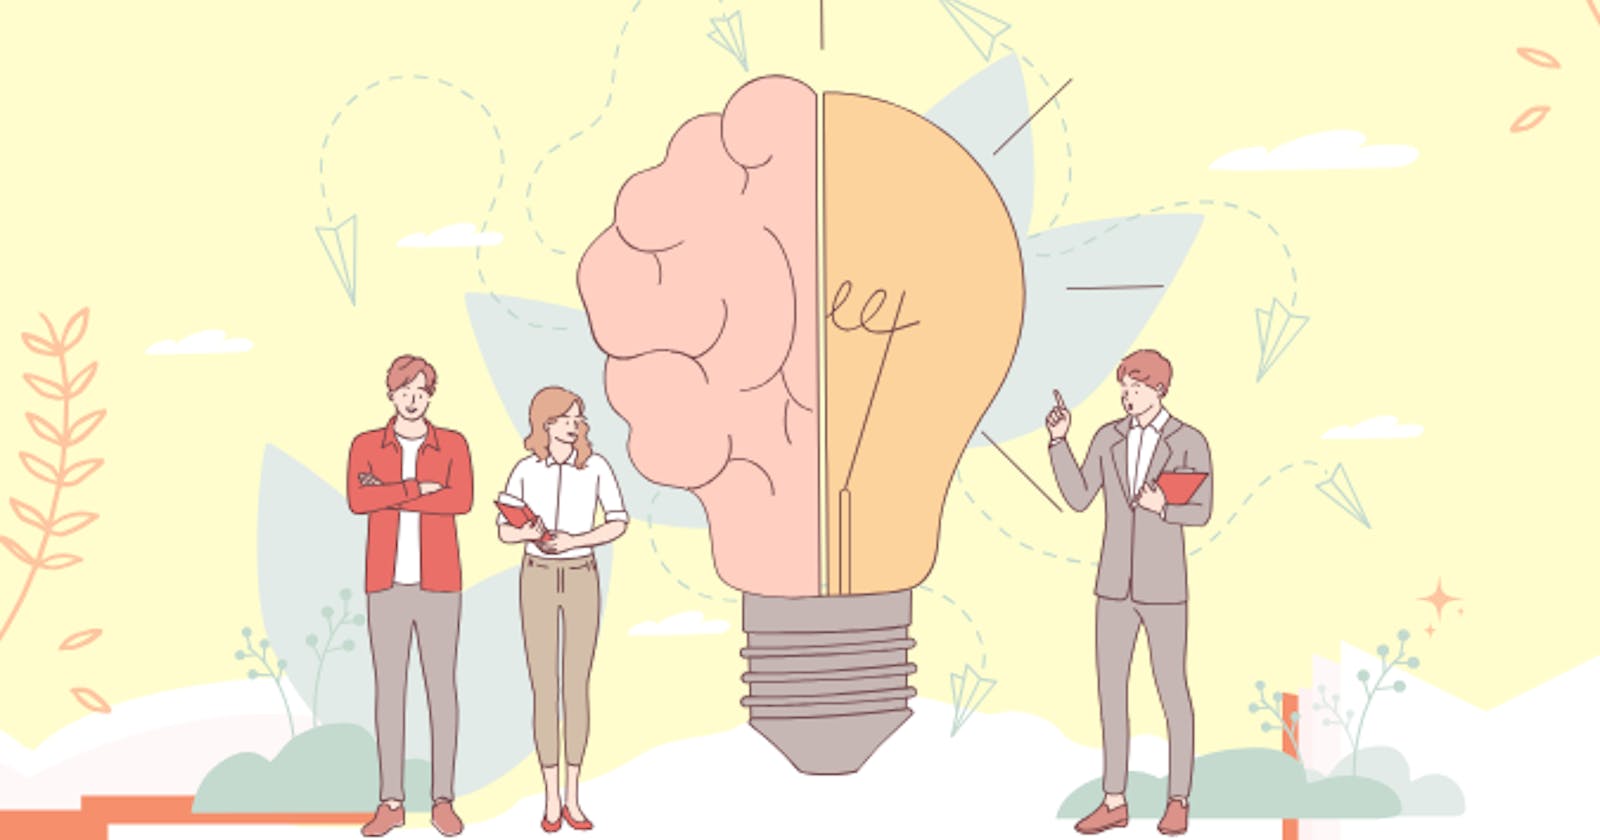 The Link Between Creative Critical Thinking and Innovation